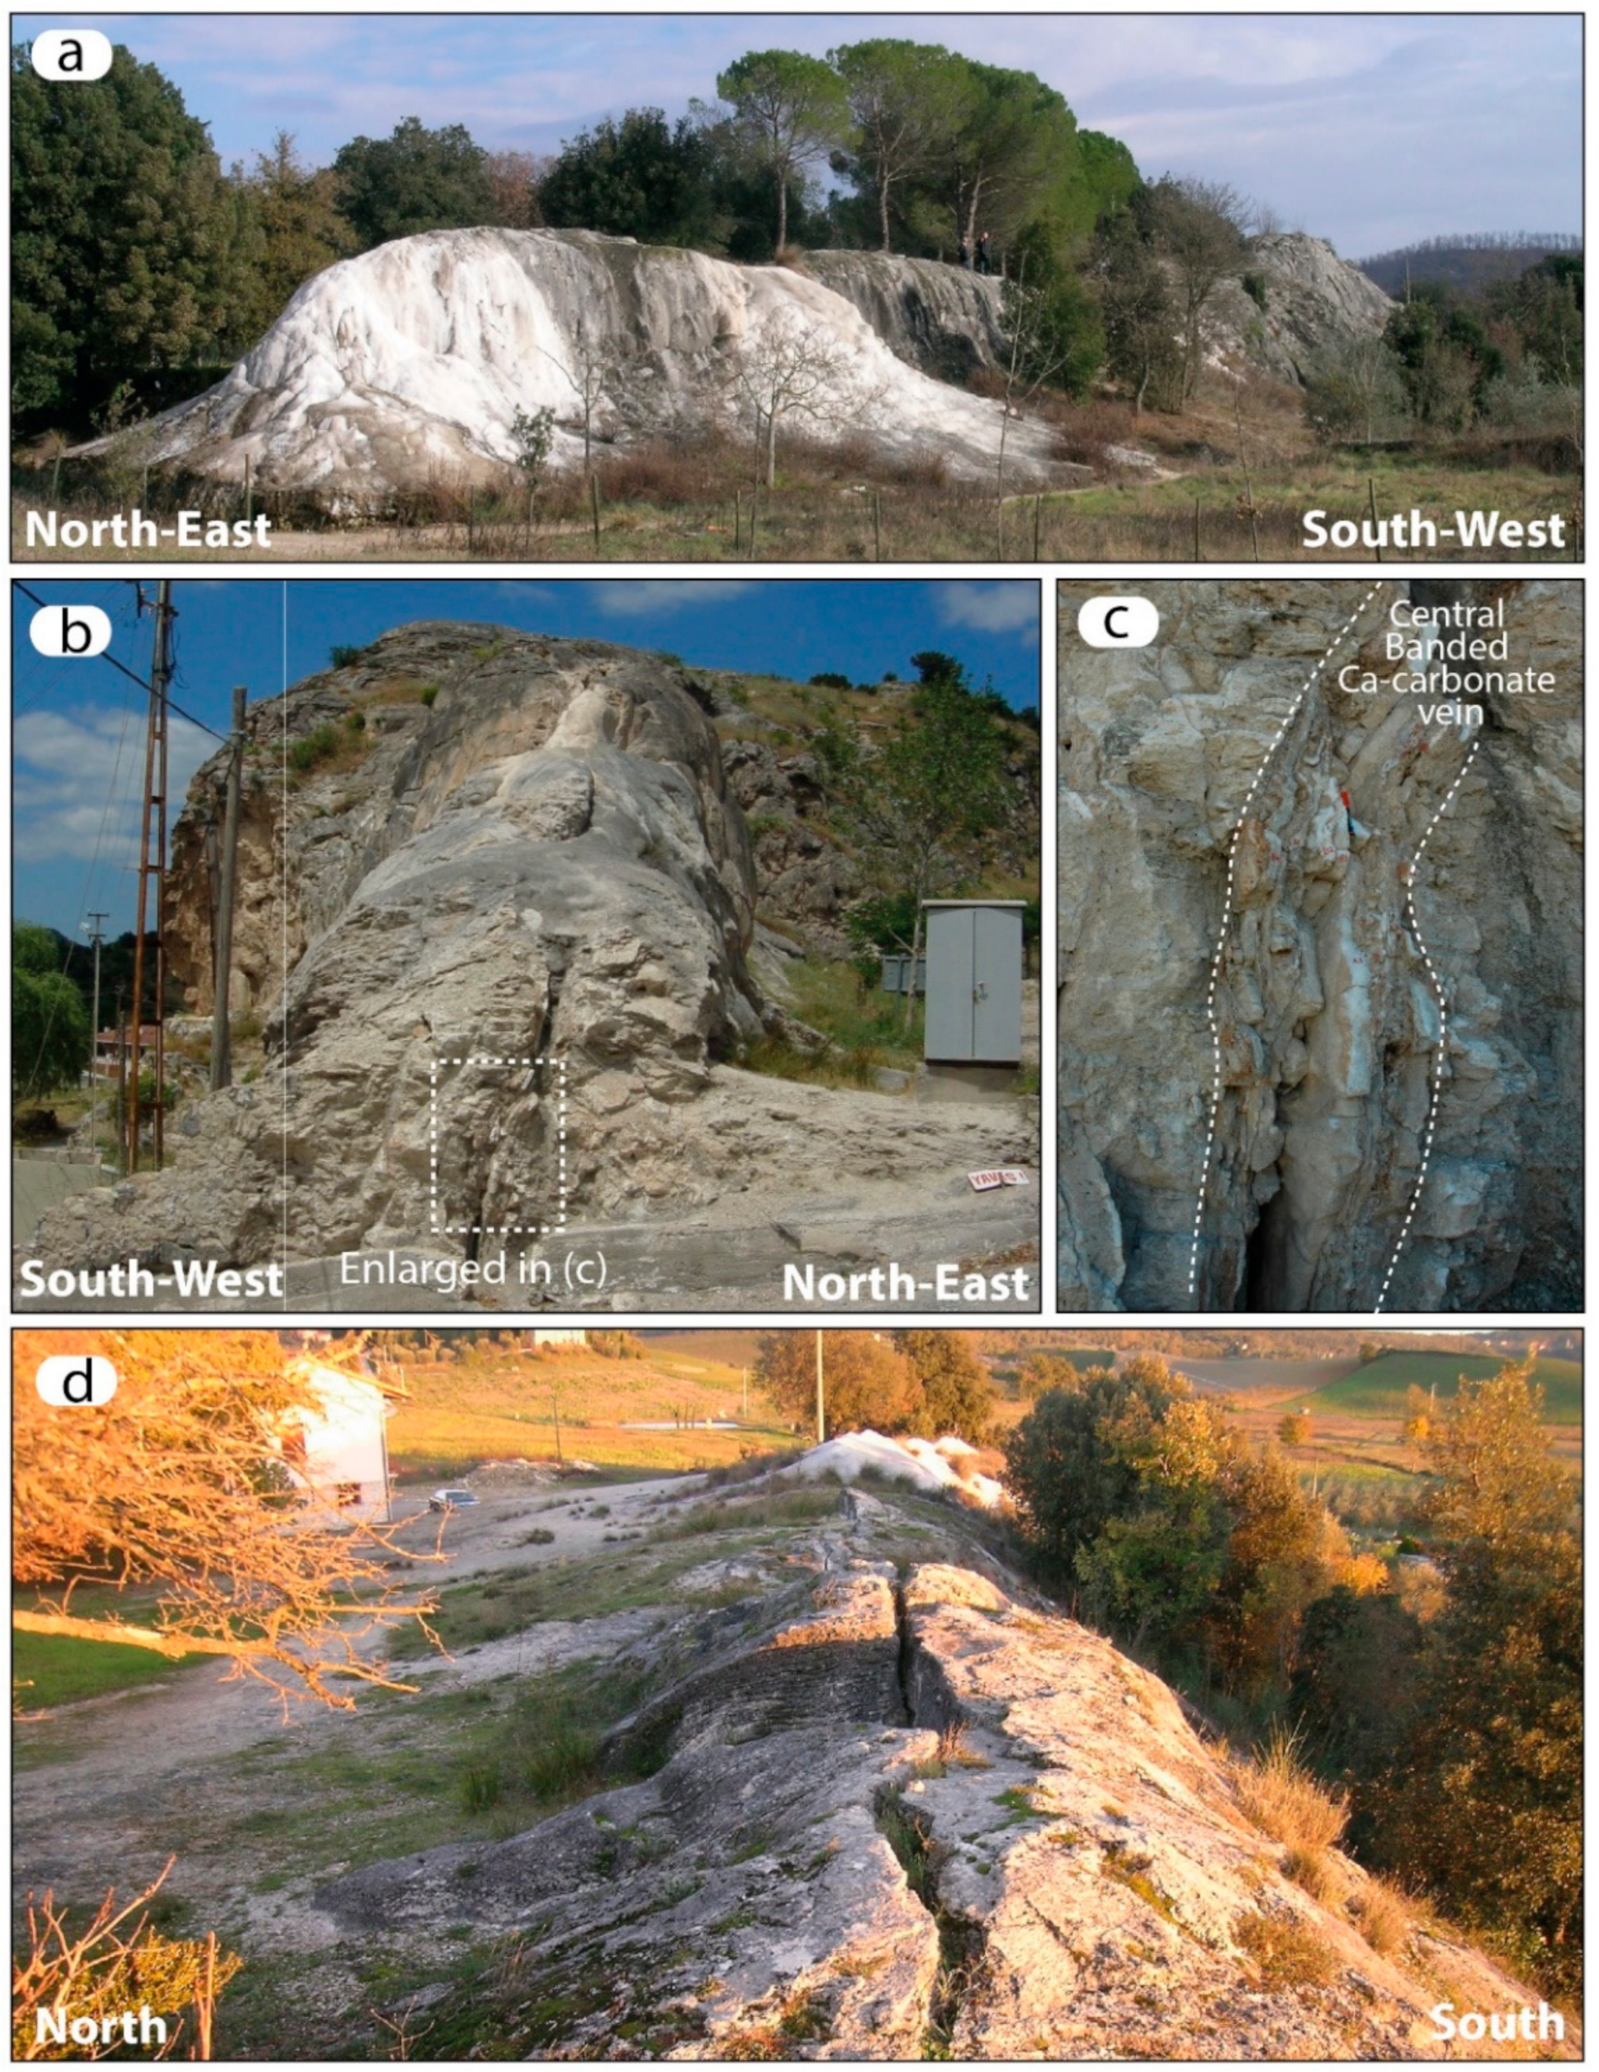 Geosciences Free Full Text Fissure Ridges A Reappraisal Of Faulting And Travertine Deposition Travitonics Html